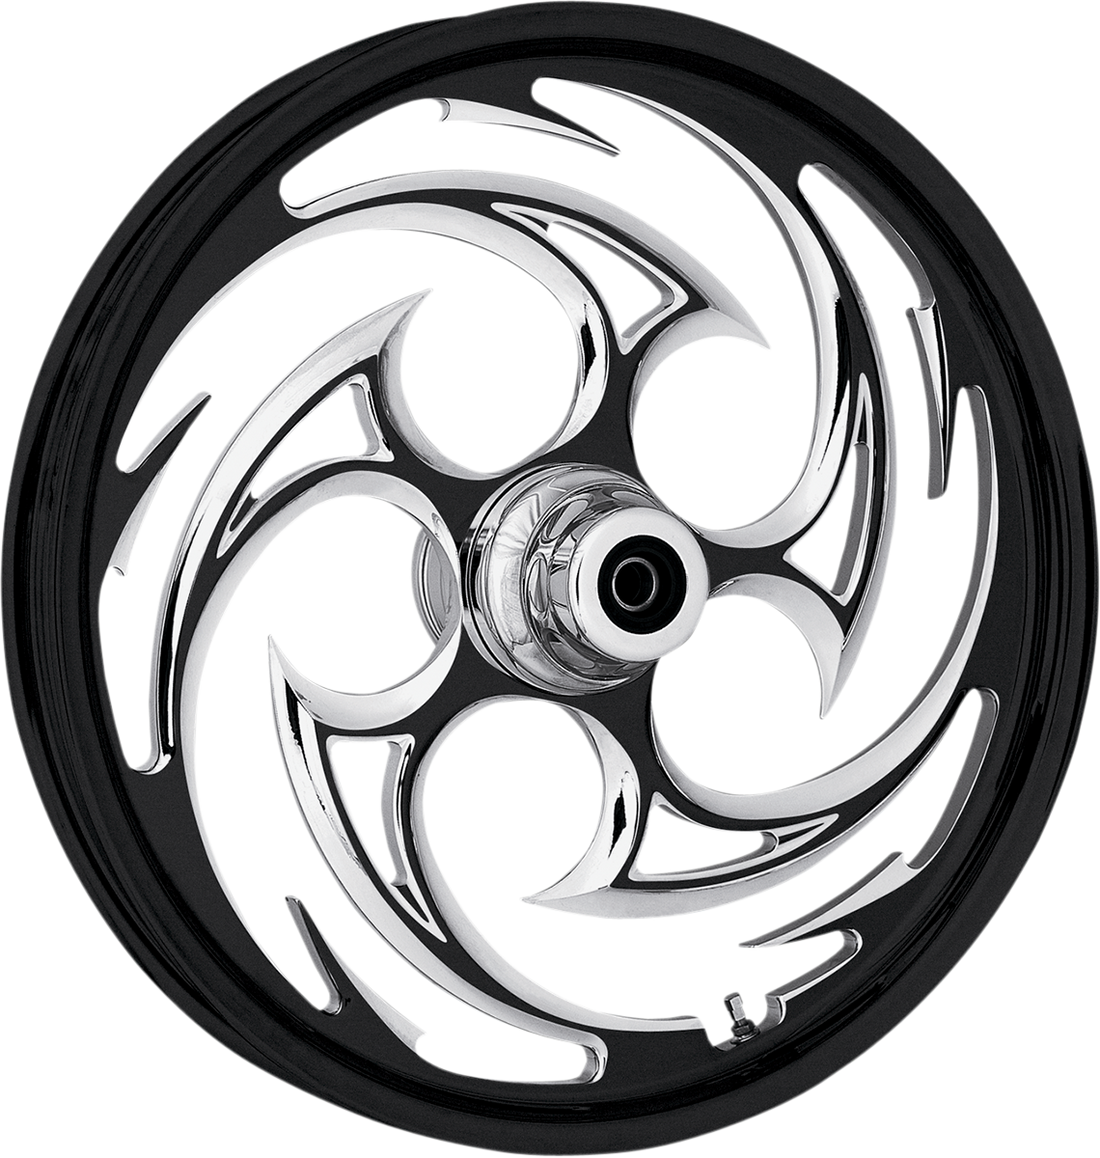 0201-1249 - RC COMPONENTS Savage Eclipse Front Wheel - Single Disc/ABS - Black - 21"x2.15" - '07-'10 FXST 21215-9927-85E